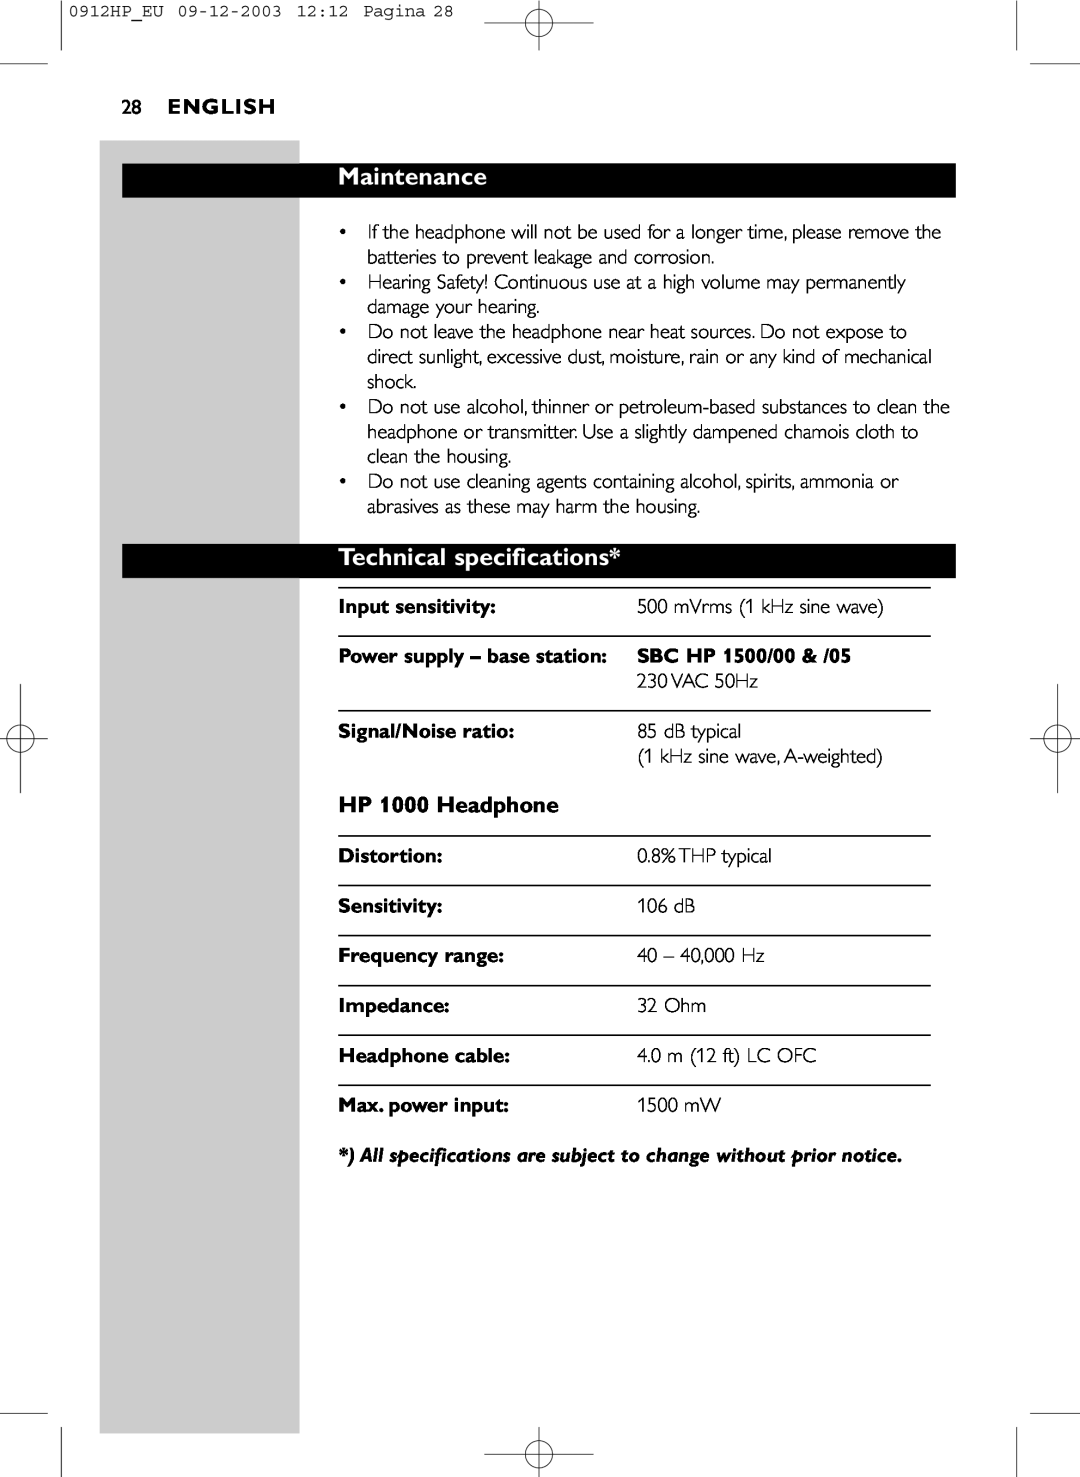 Philips HP1500 manual Maintenance, Technical specifications, English, HP 1000 Headphone 